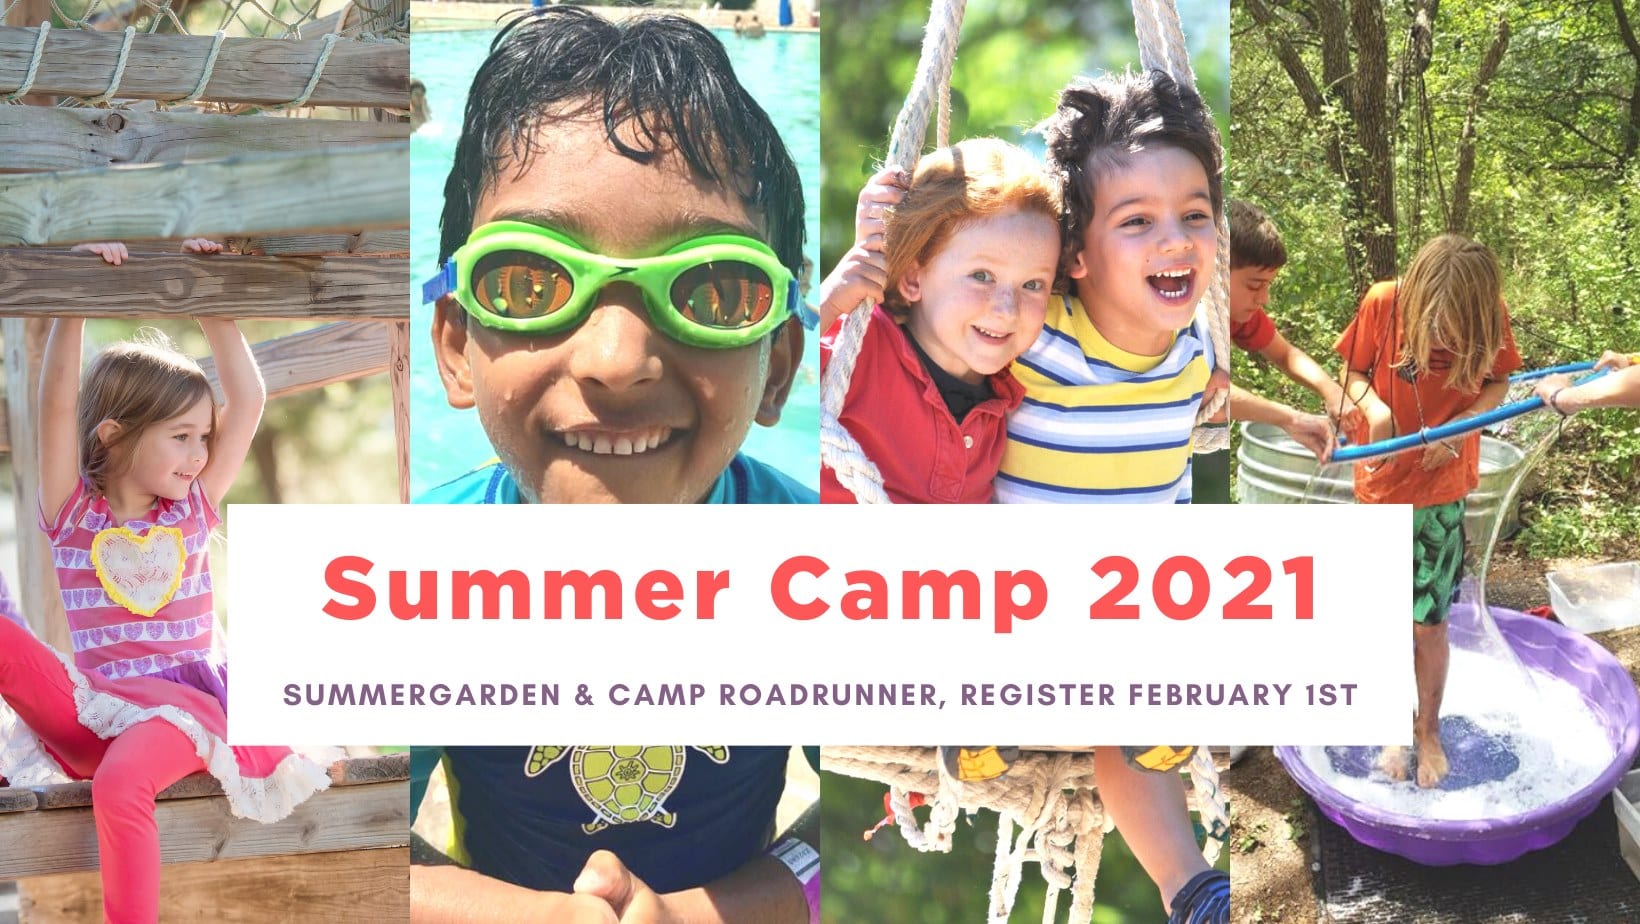 Summer camp jobs in waldorf md